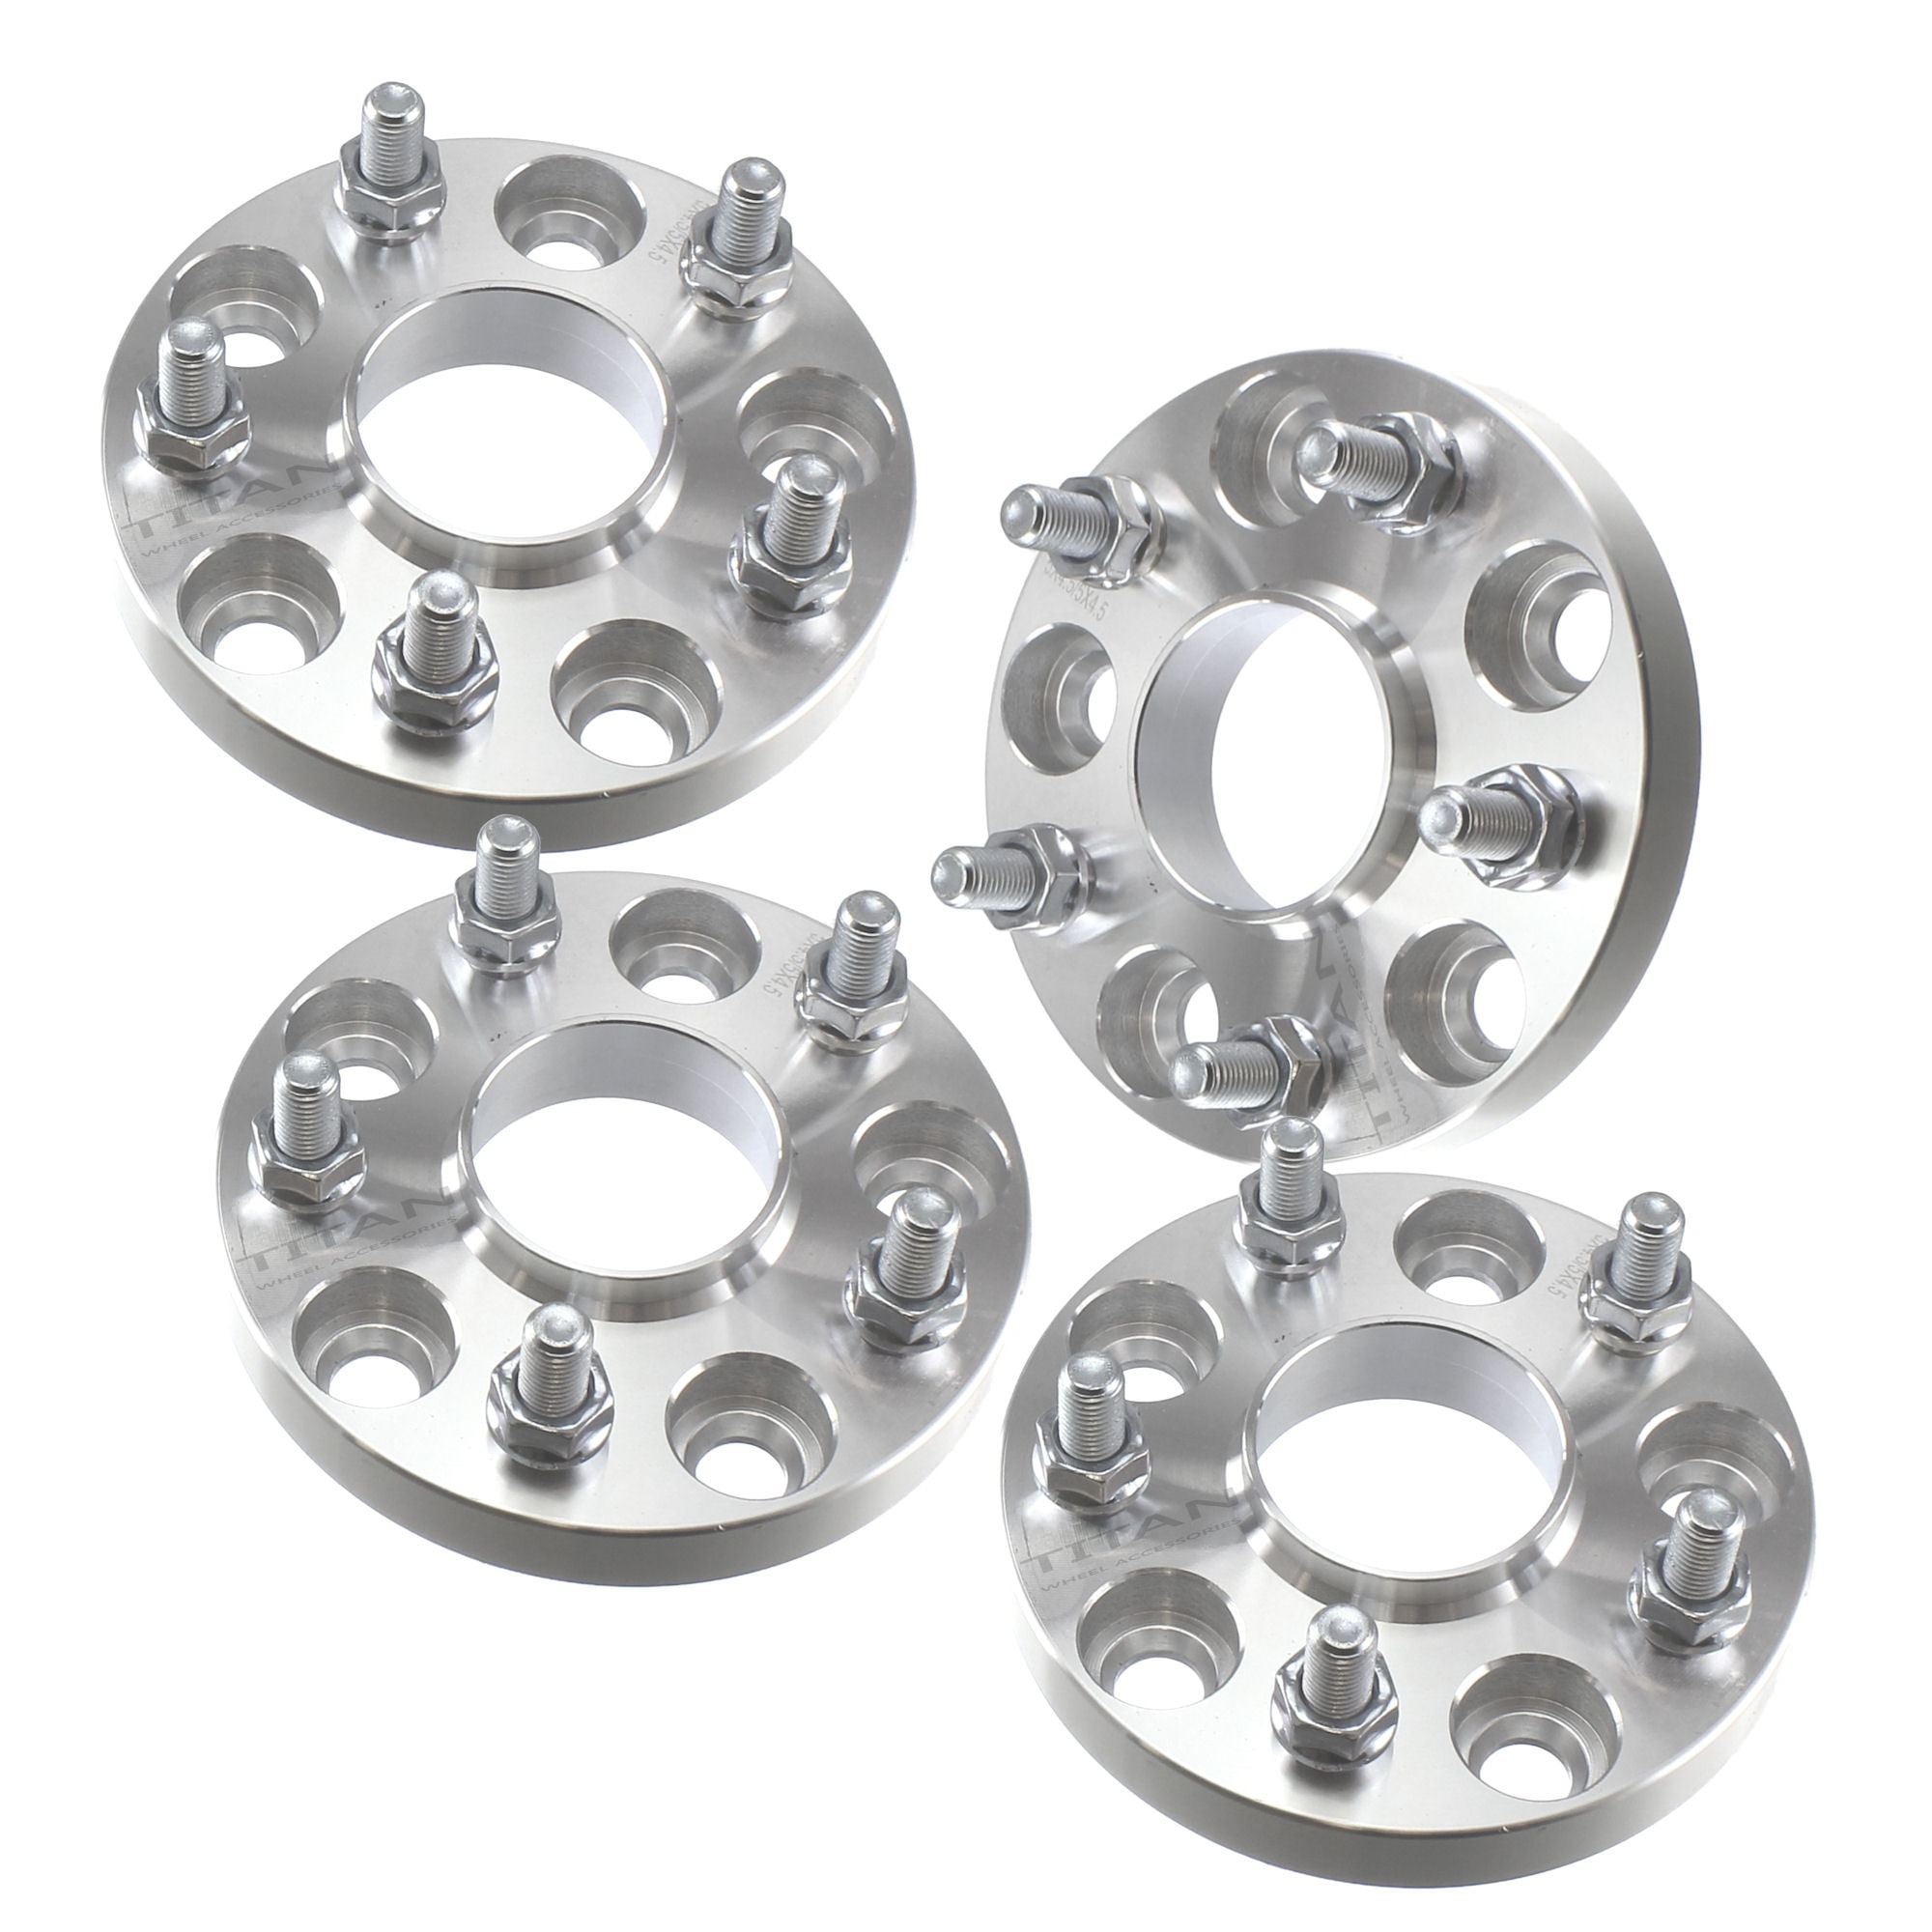 15mm Hubcentric Wheel Spacer Adapters 5x4.5'' for Lexus GS350,GS400,GS450 4